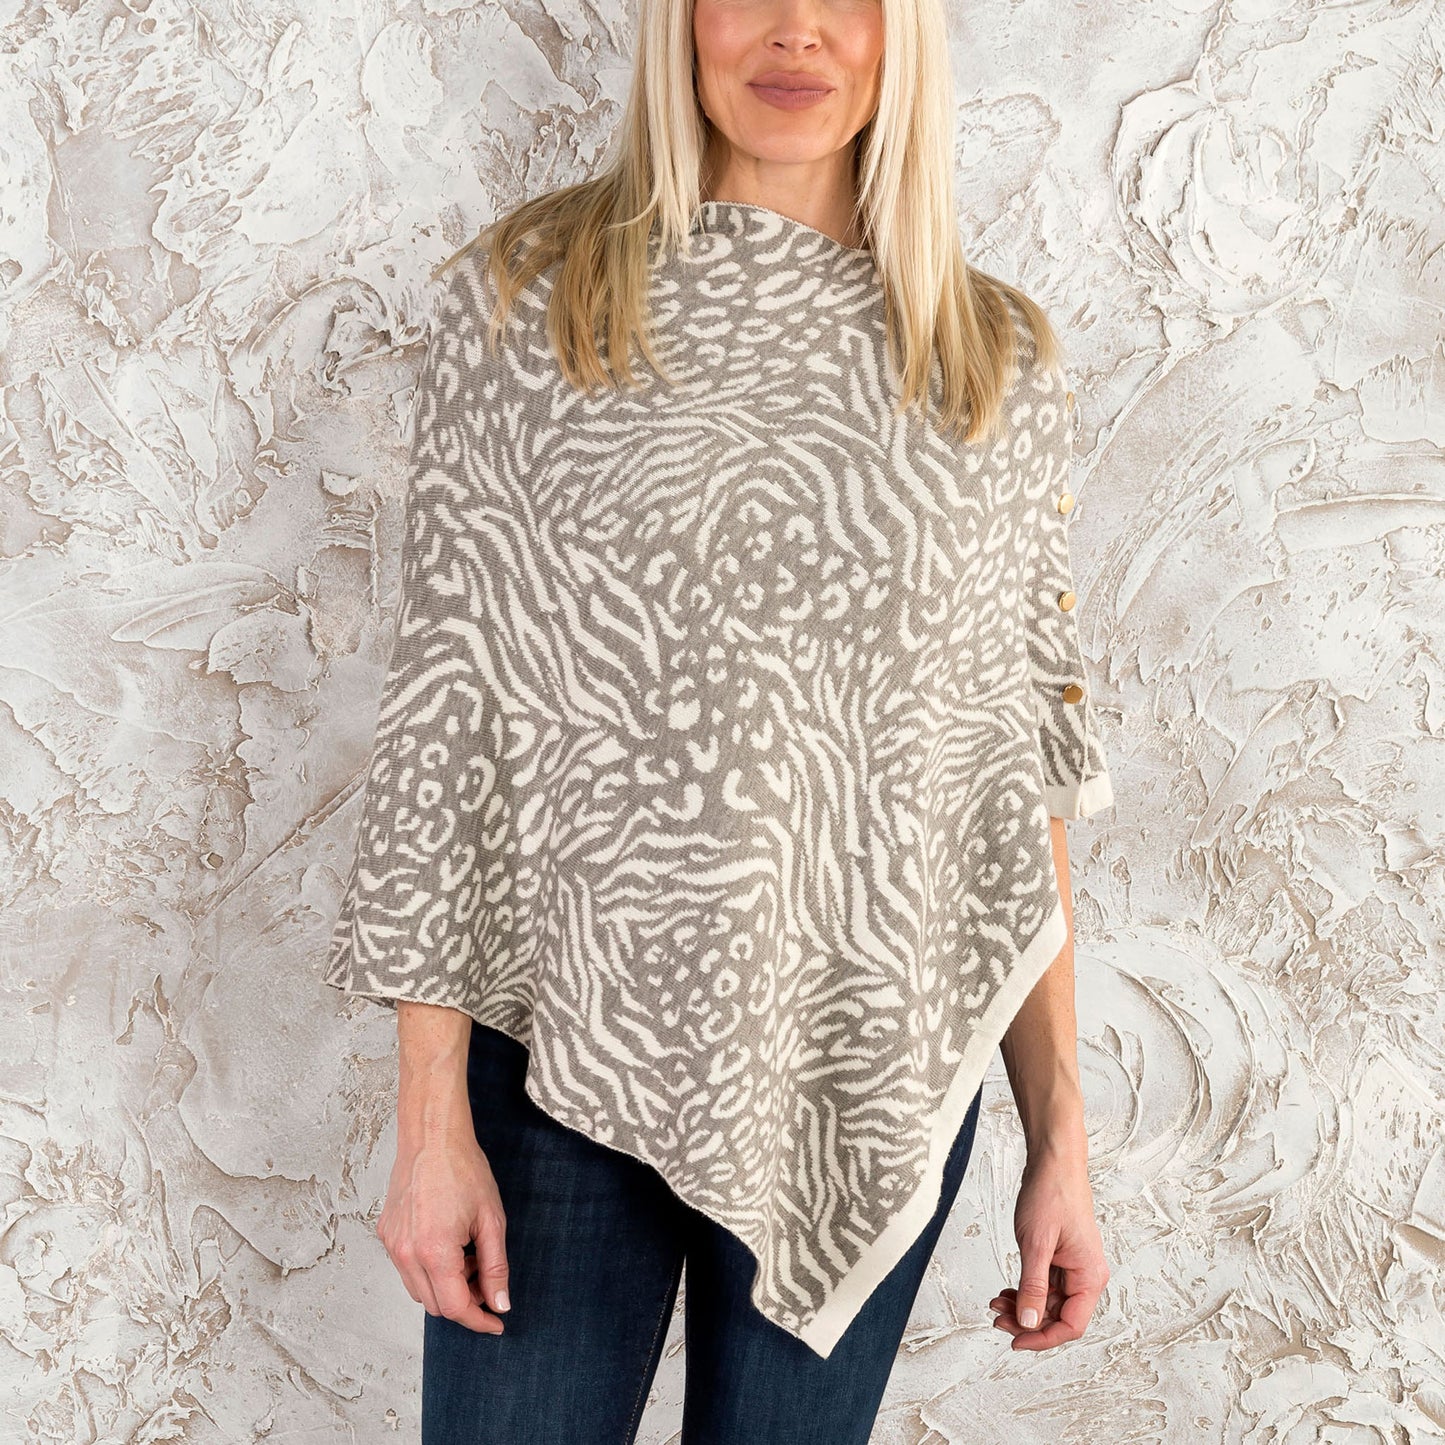 Animal Print Reversible Poncho with Gold Button Accents